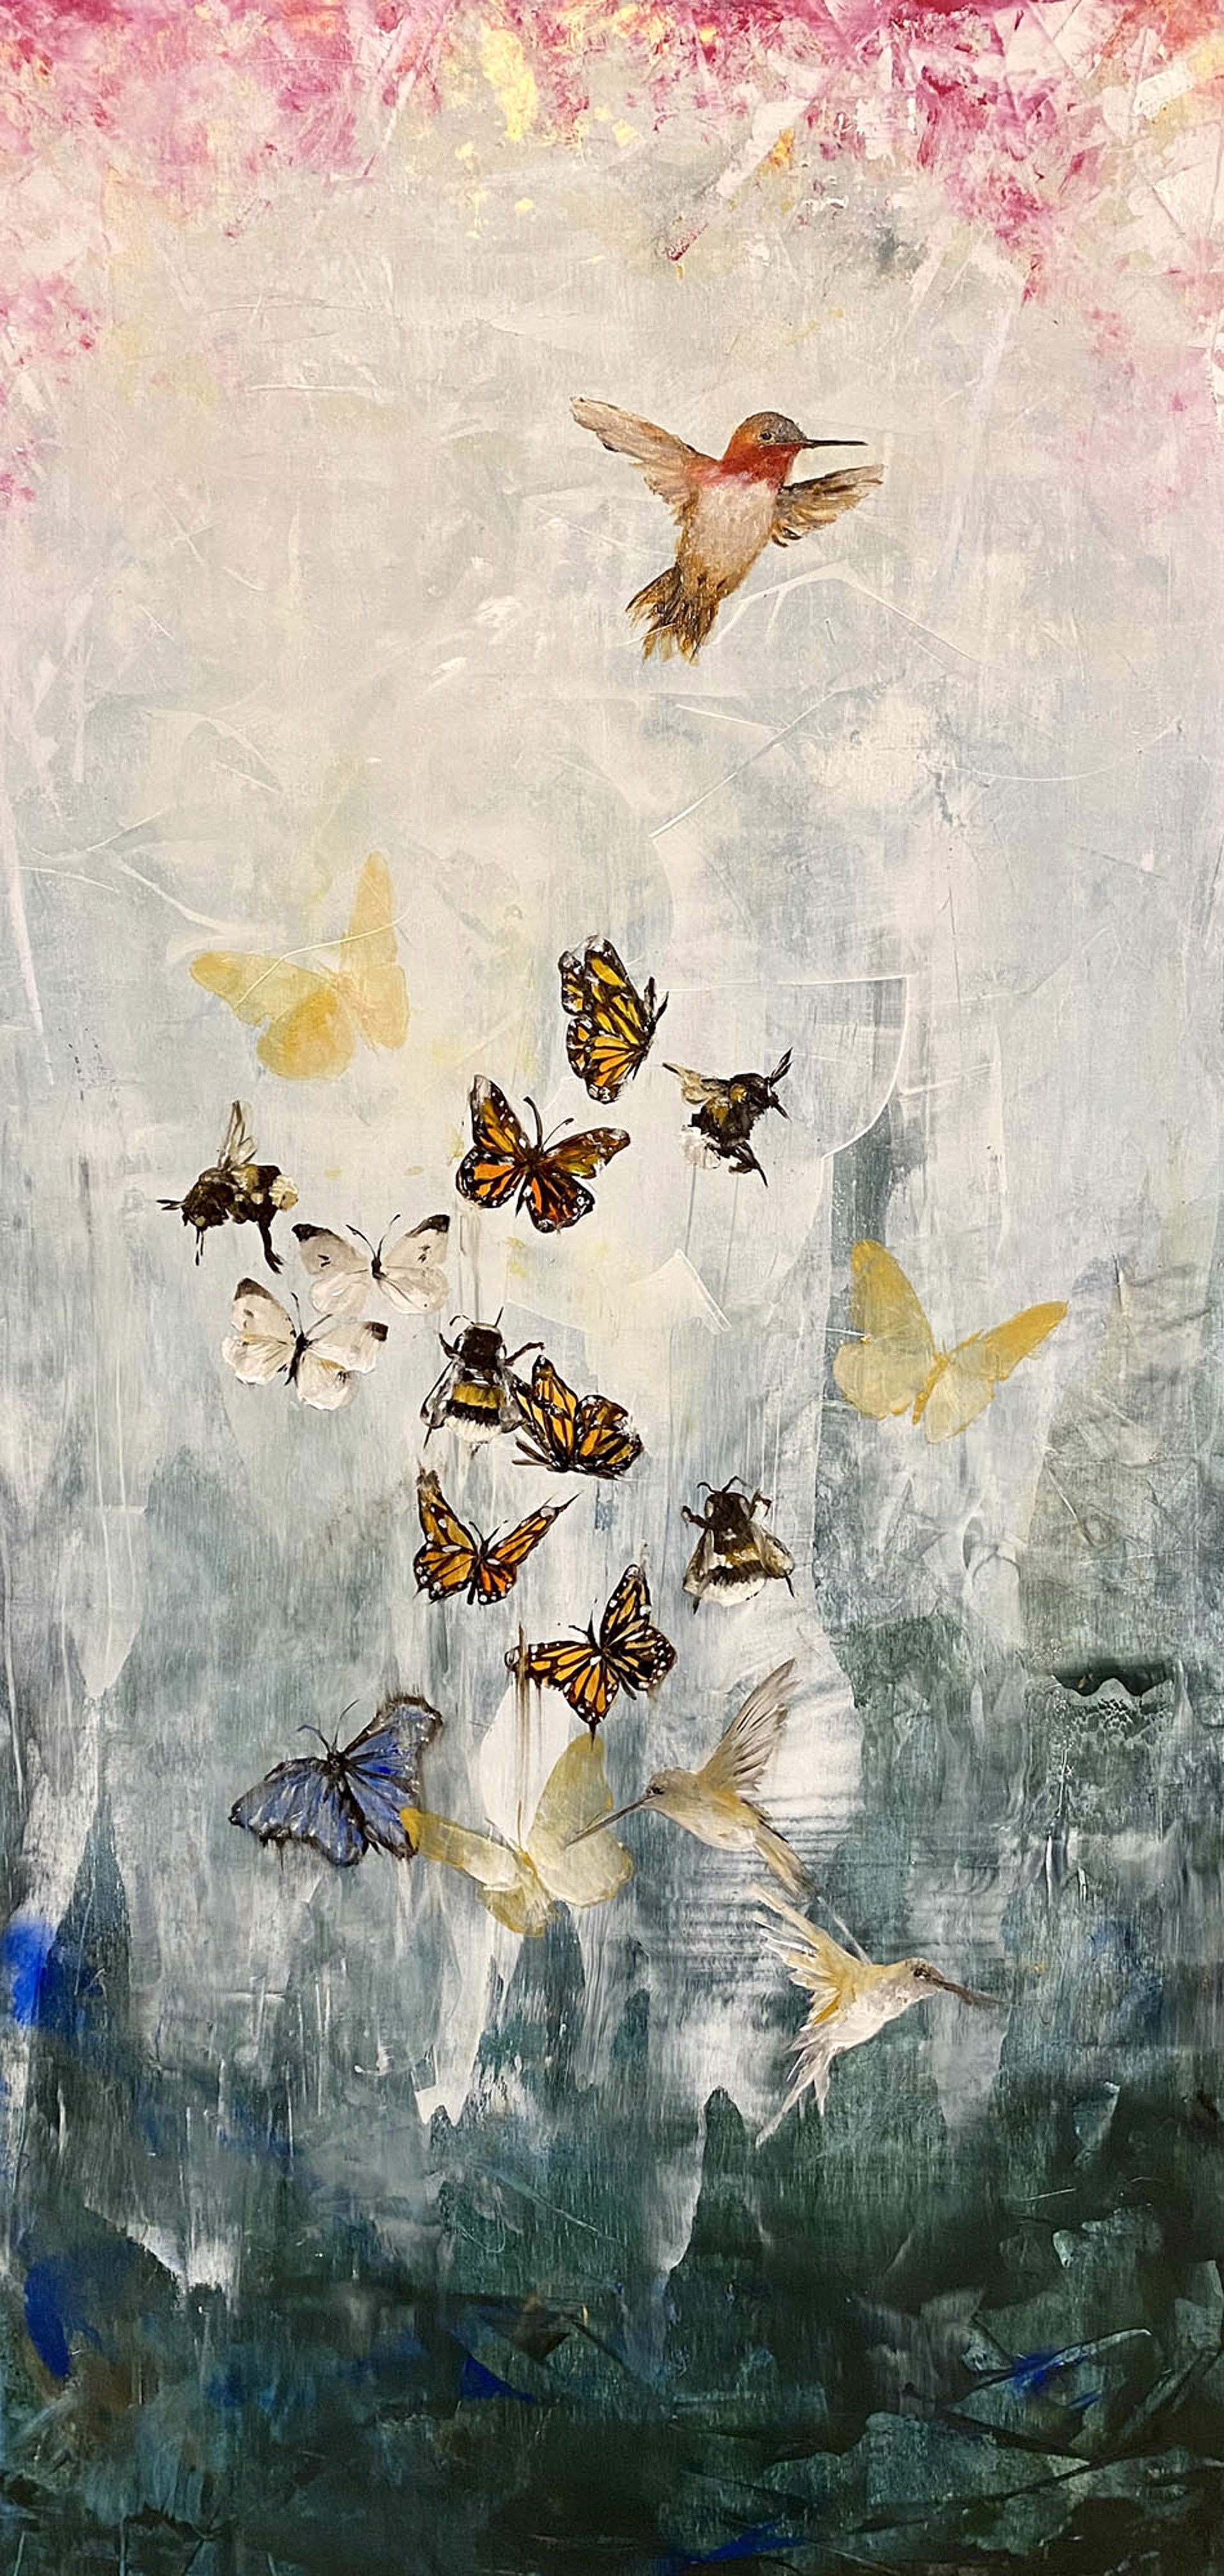 Original Oil Painting Of Butterflies Humming Birds And Bees In Flight Featuring A Contemporary Abstract Blue White And Pink Background